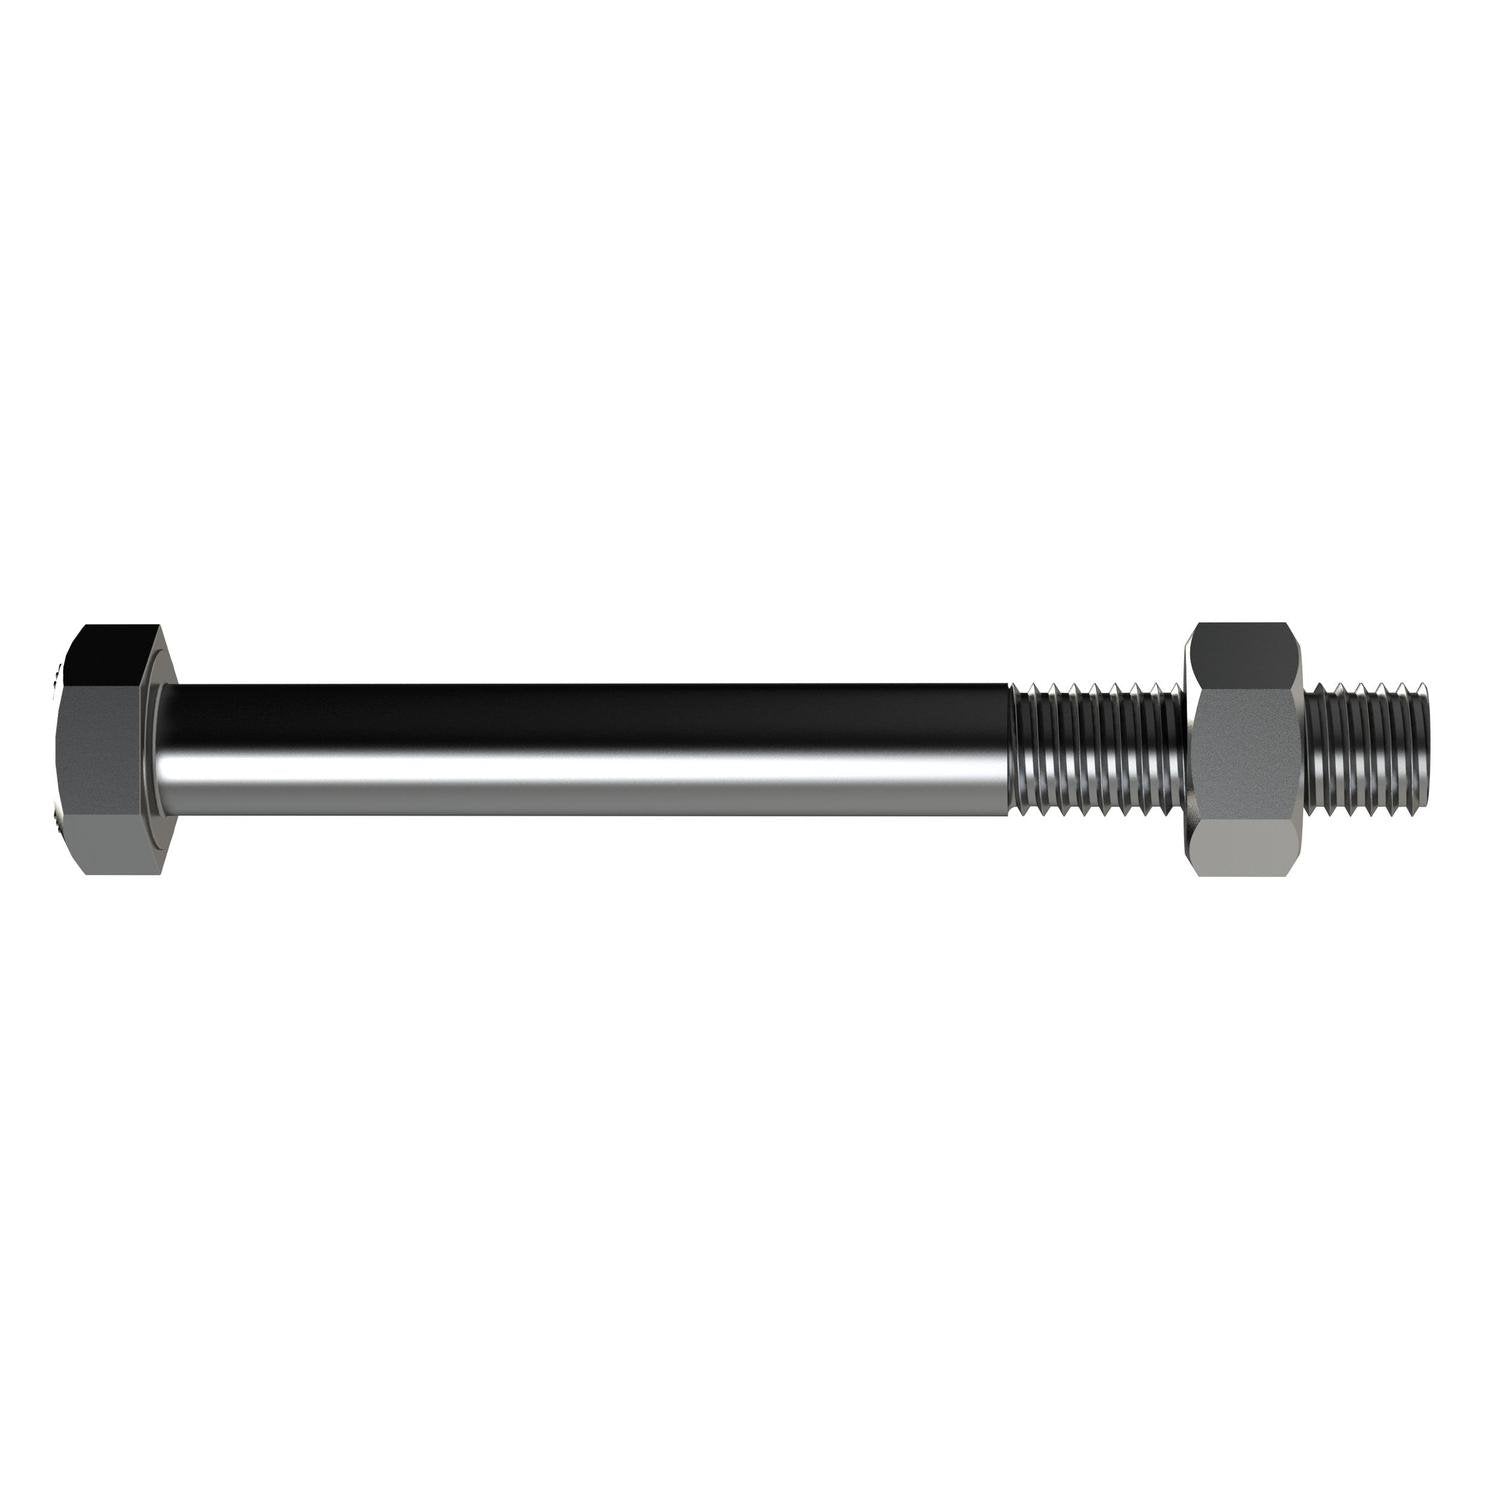 Bremick Engineer Bolt & Nut M16 X 240Mm Stainless Steel